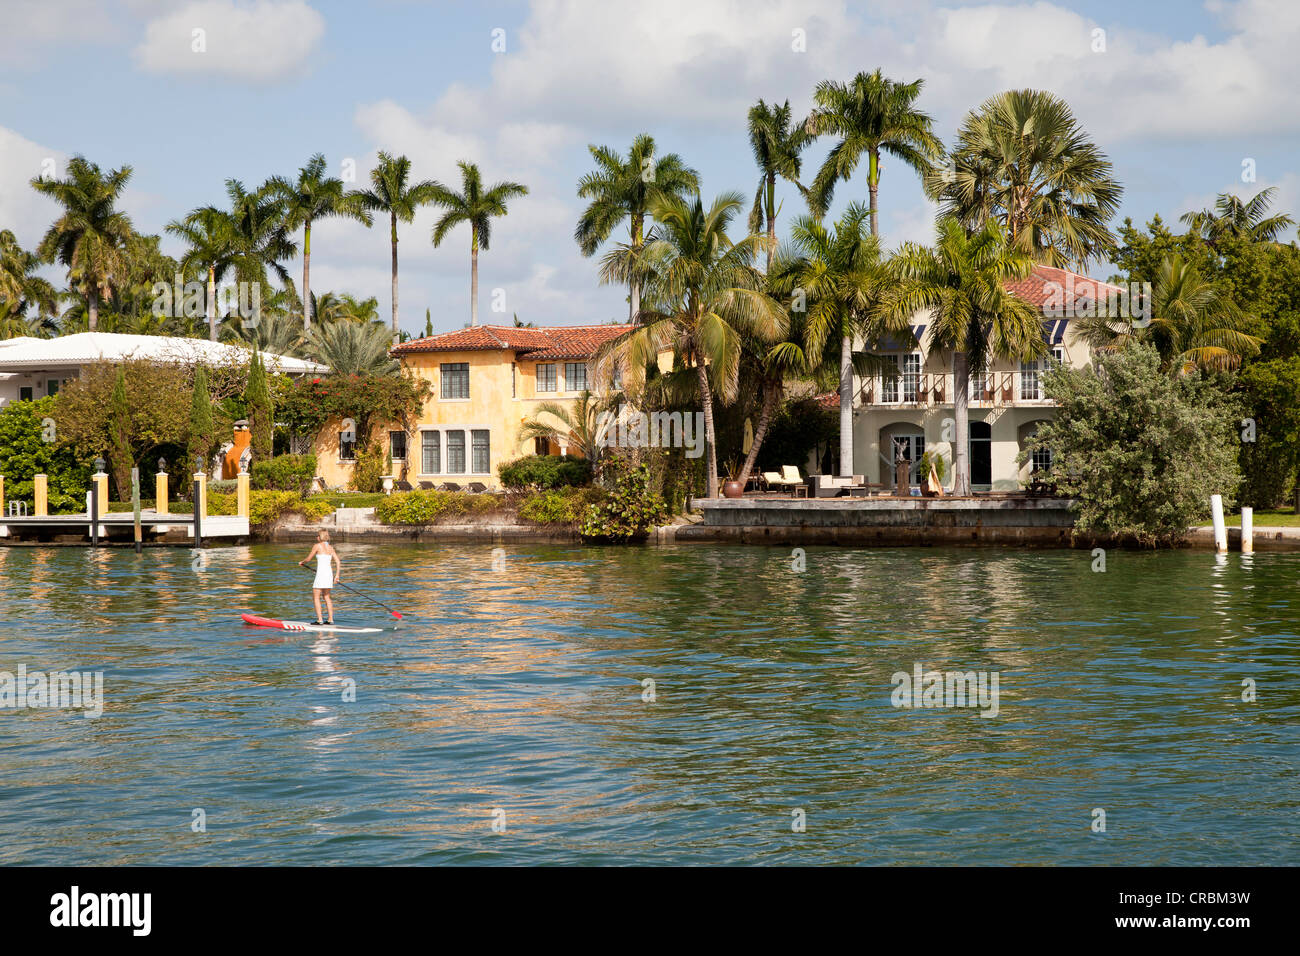 Girl on a surfboard off luxury mansions in Miami, Florida, USA Stock Photo